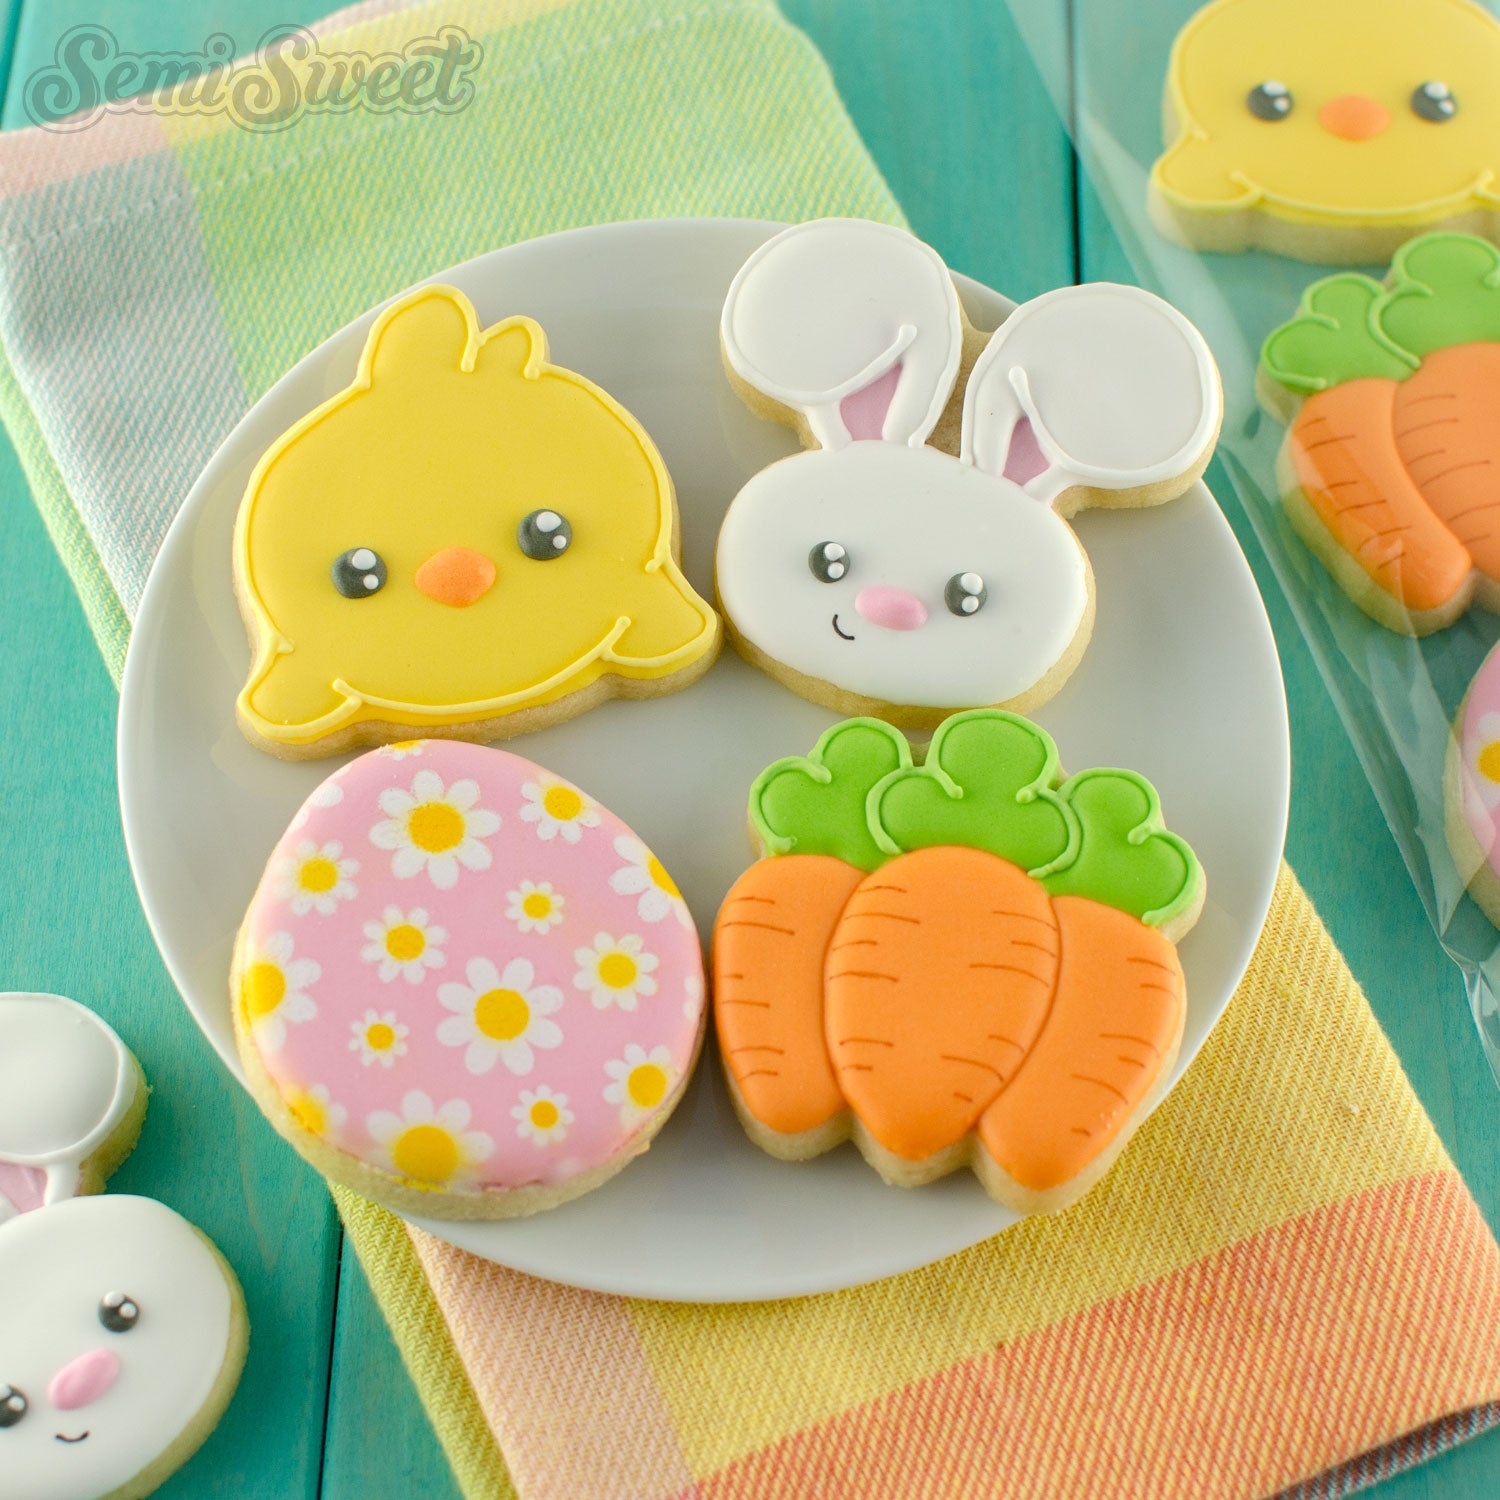 Mini Easter Cookie Cutters Color 8 PC Set